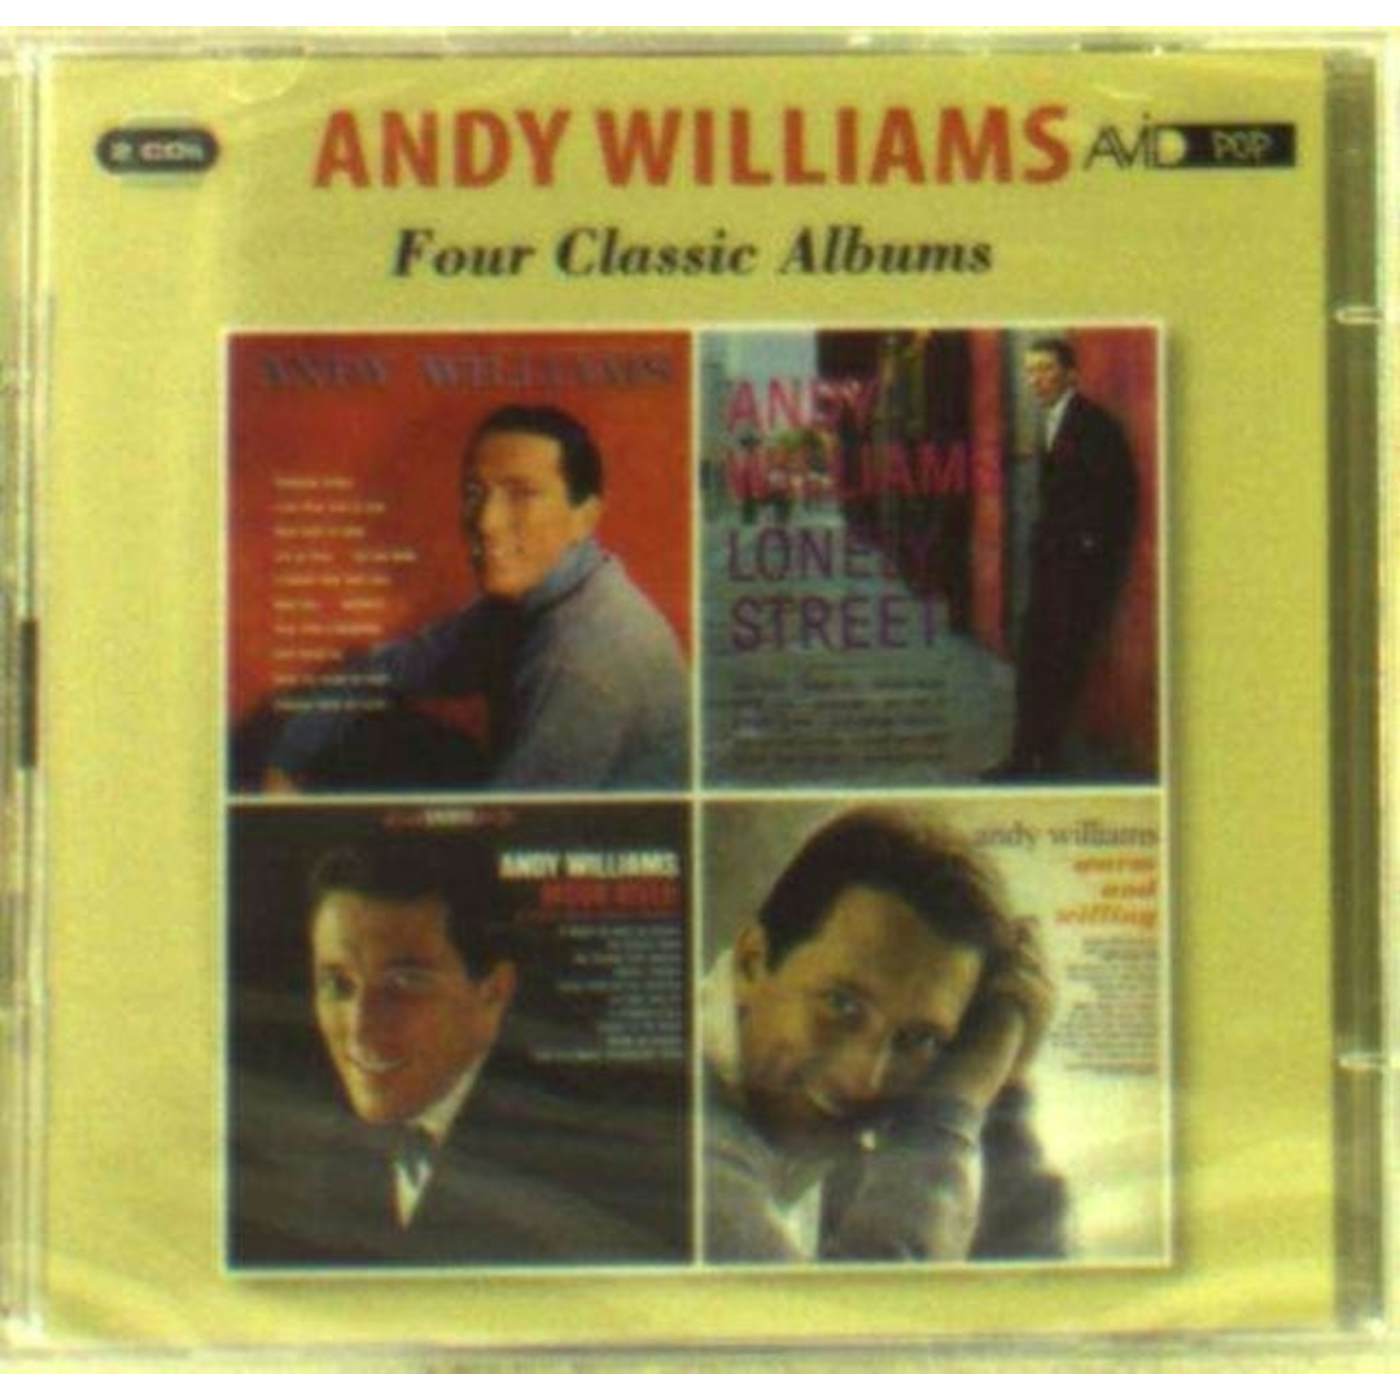 Andy Williams CD - Four Classic Albums (Andy Williams / Lonely Street / Moon River And Other Great Movie Themes / Warm And Willing)